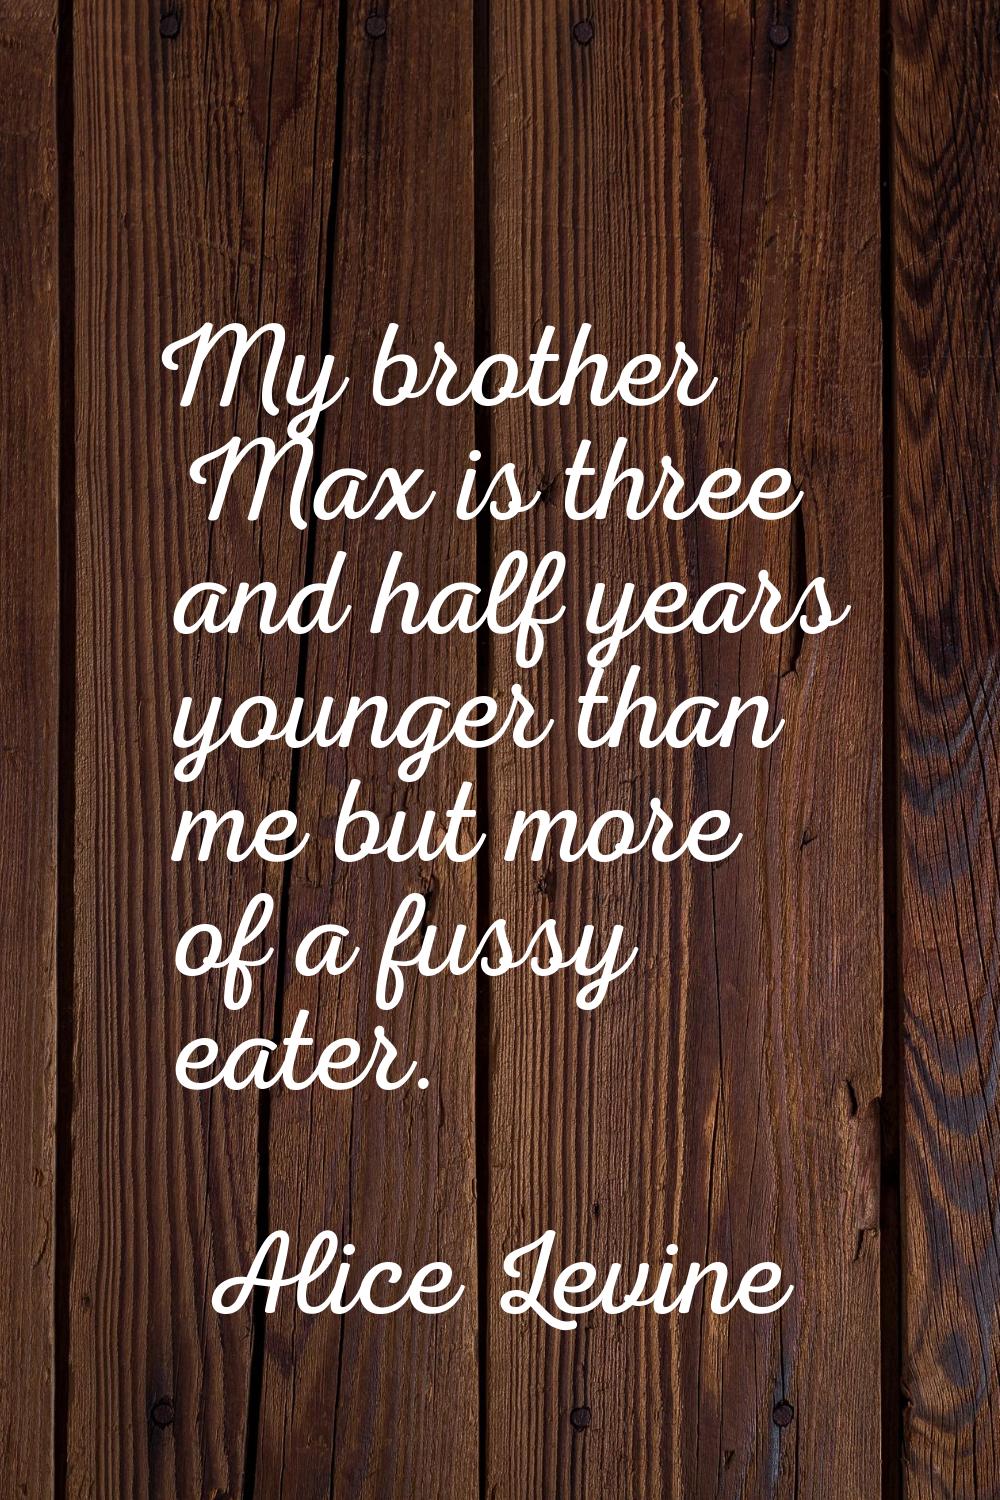 My brother Max is three and half years younger than me but more of a fussy eater.